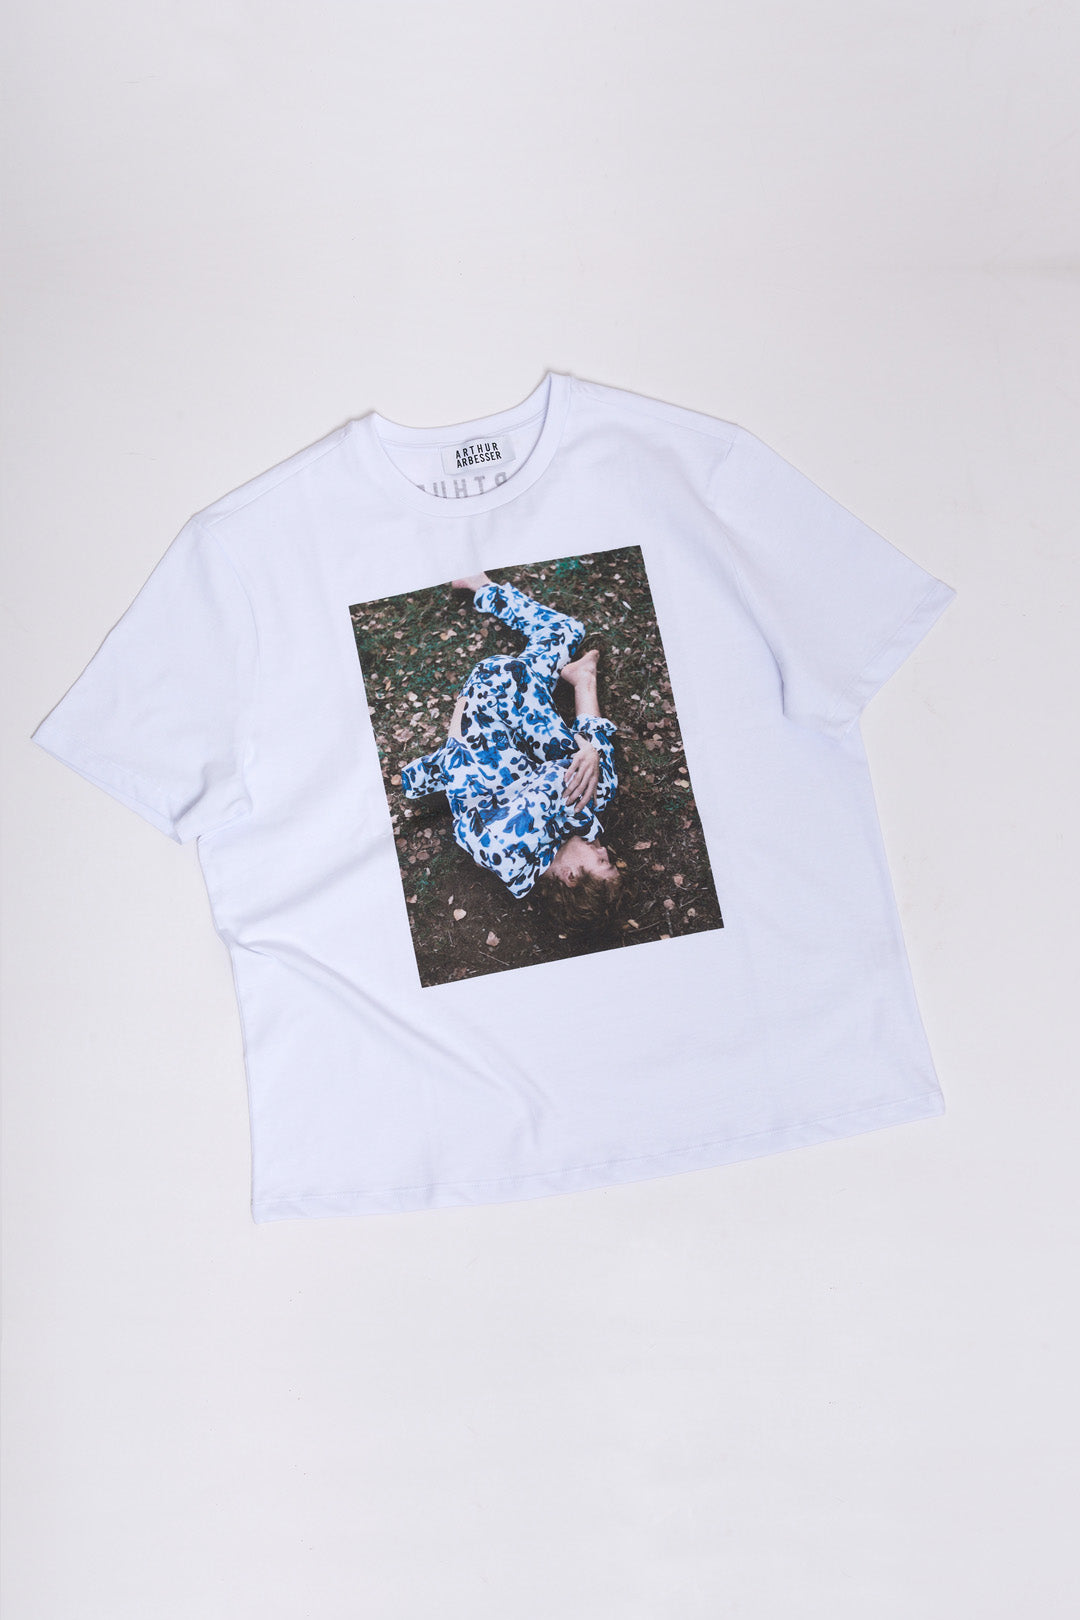 SS20 CAMPAIGN T-SHIRT